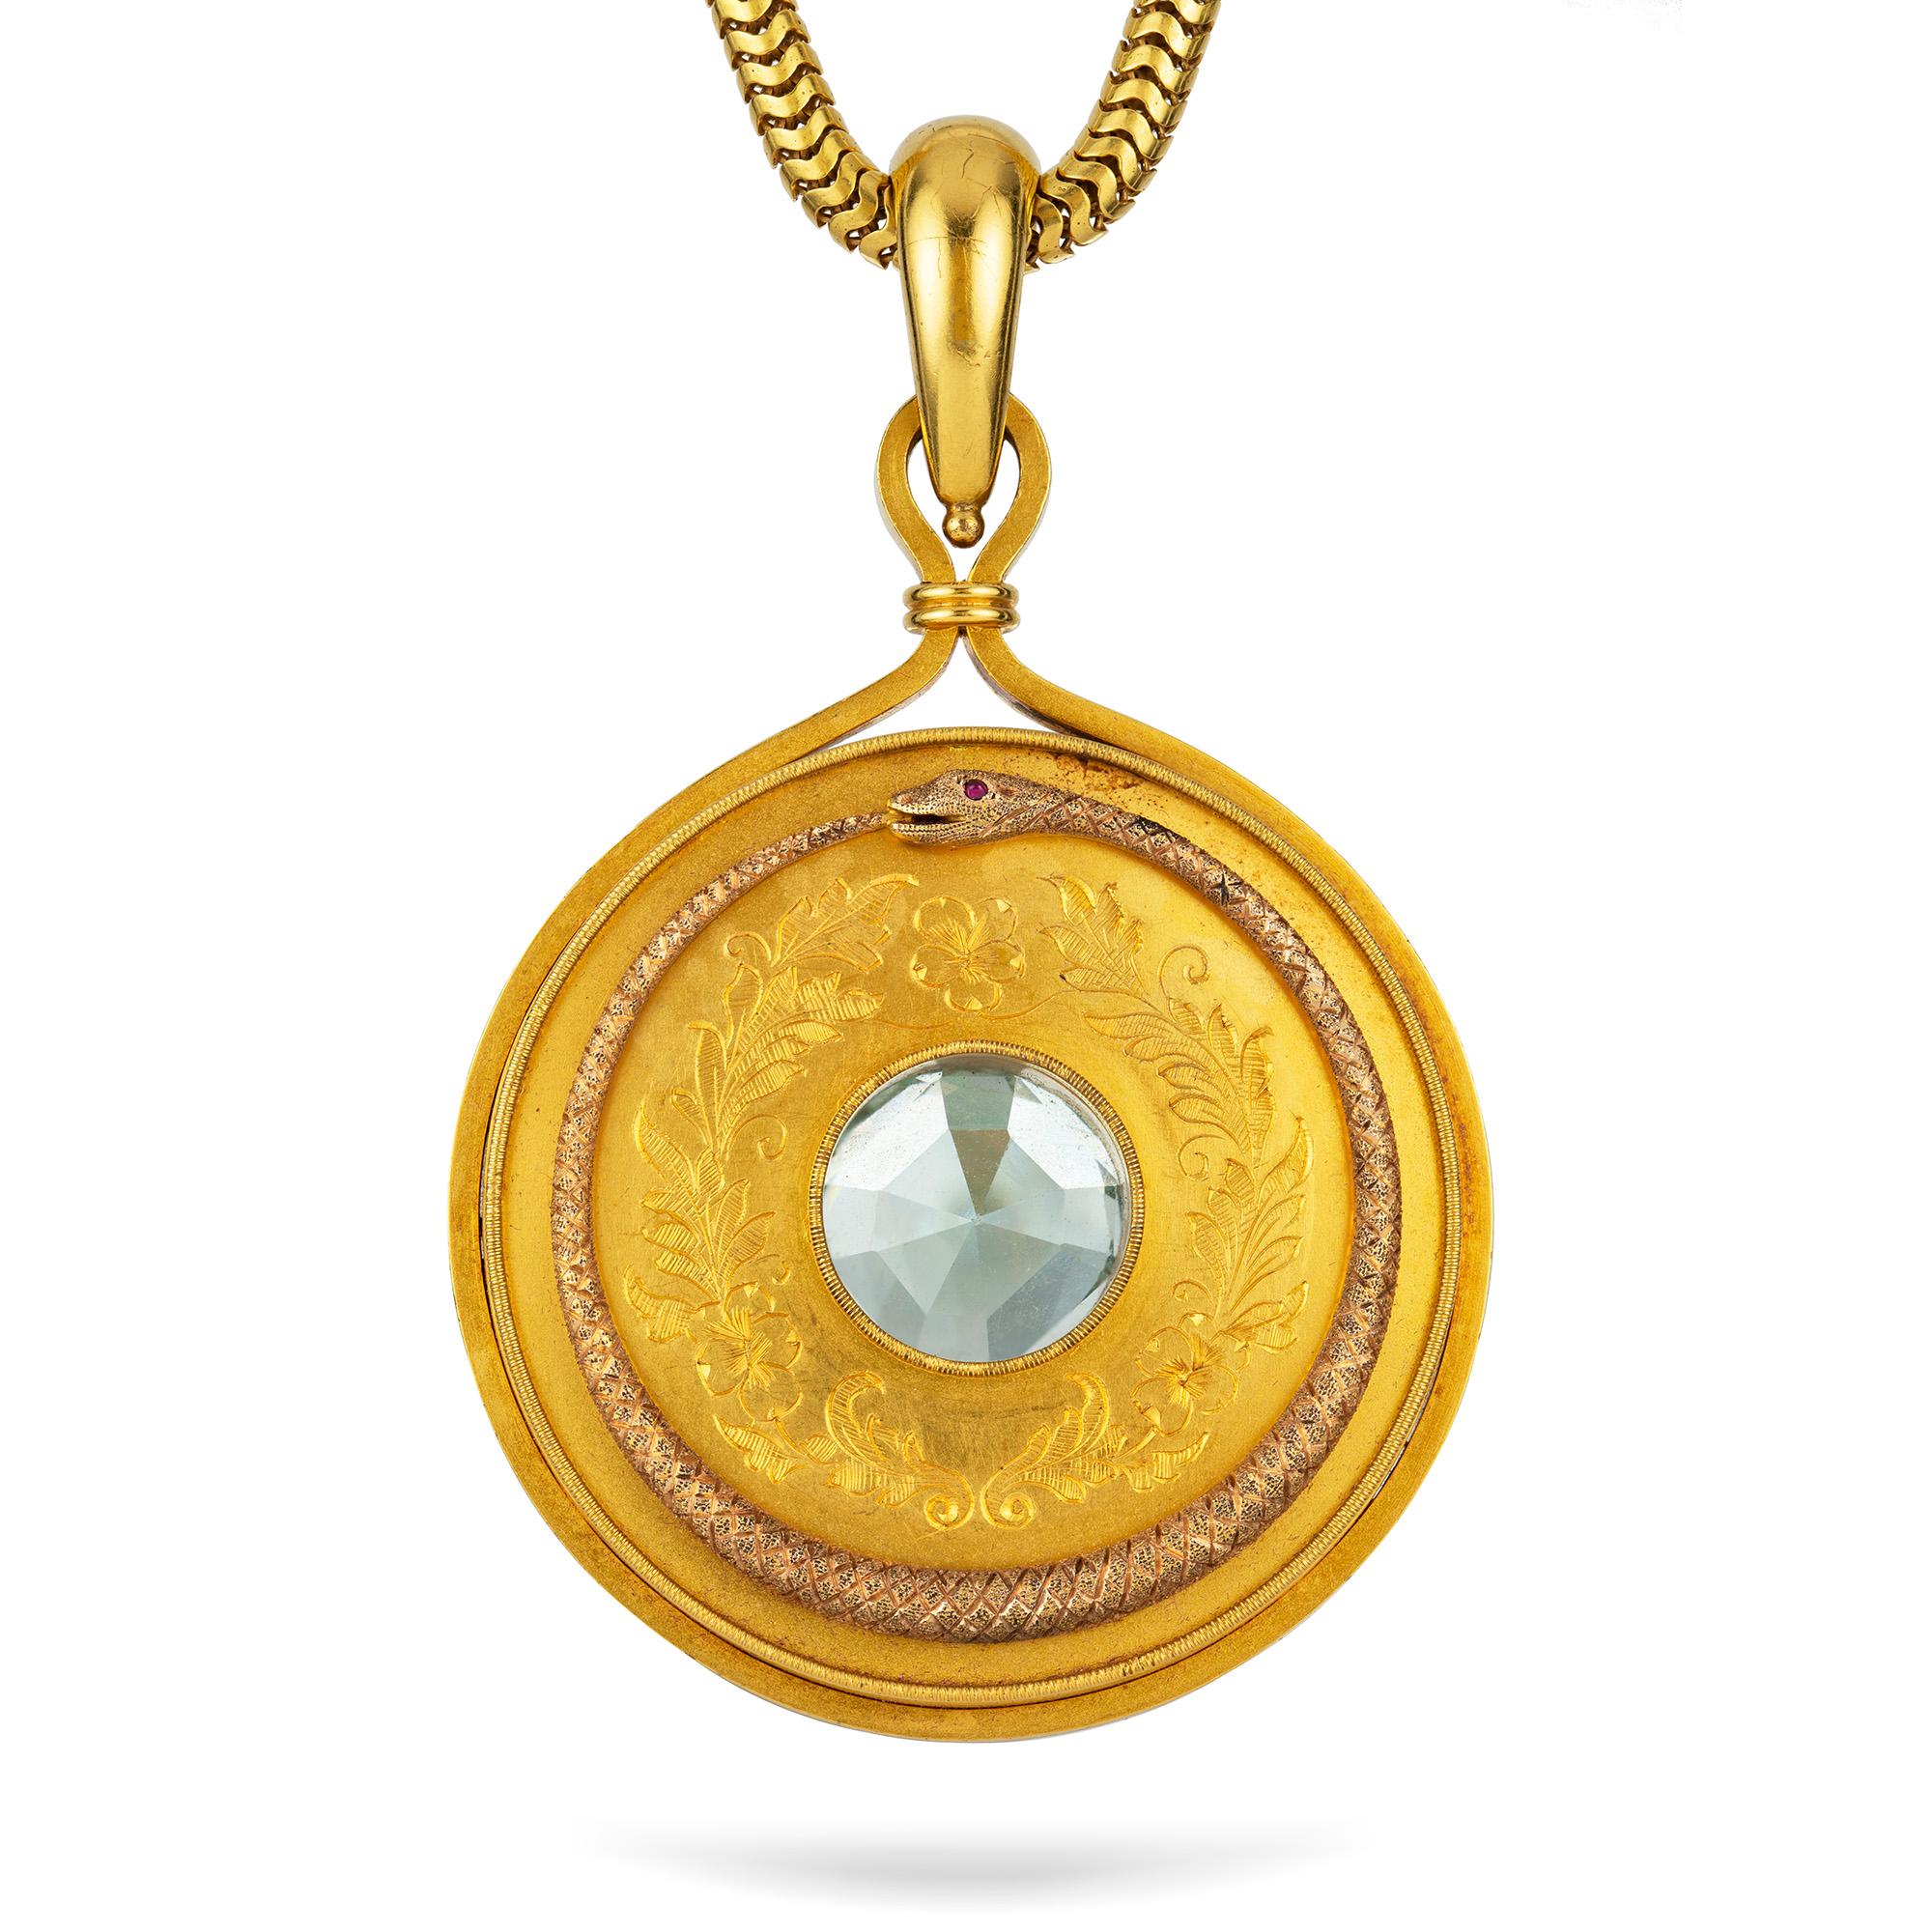 A Victorian aquamarine, pearl and gold pendant-necklace, made in the archaeological style, the faceted cushion shape aquamarine measuring 15.9 x 15.7mm, surrounded by a double cluster of half-pearls and a gold frame with three gold rosettes and